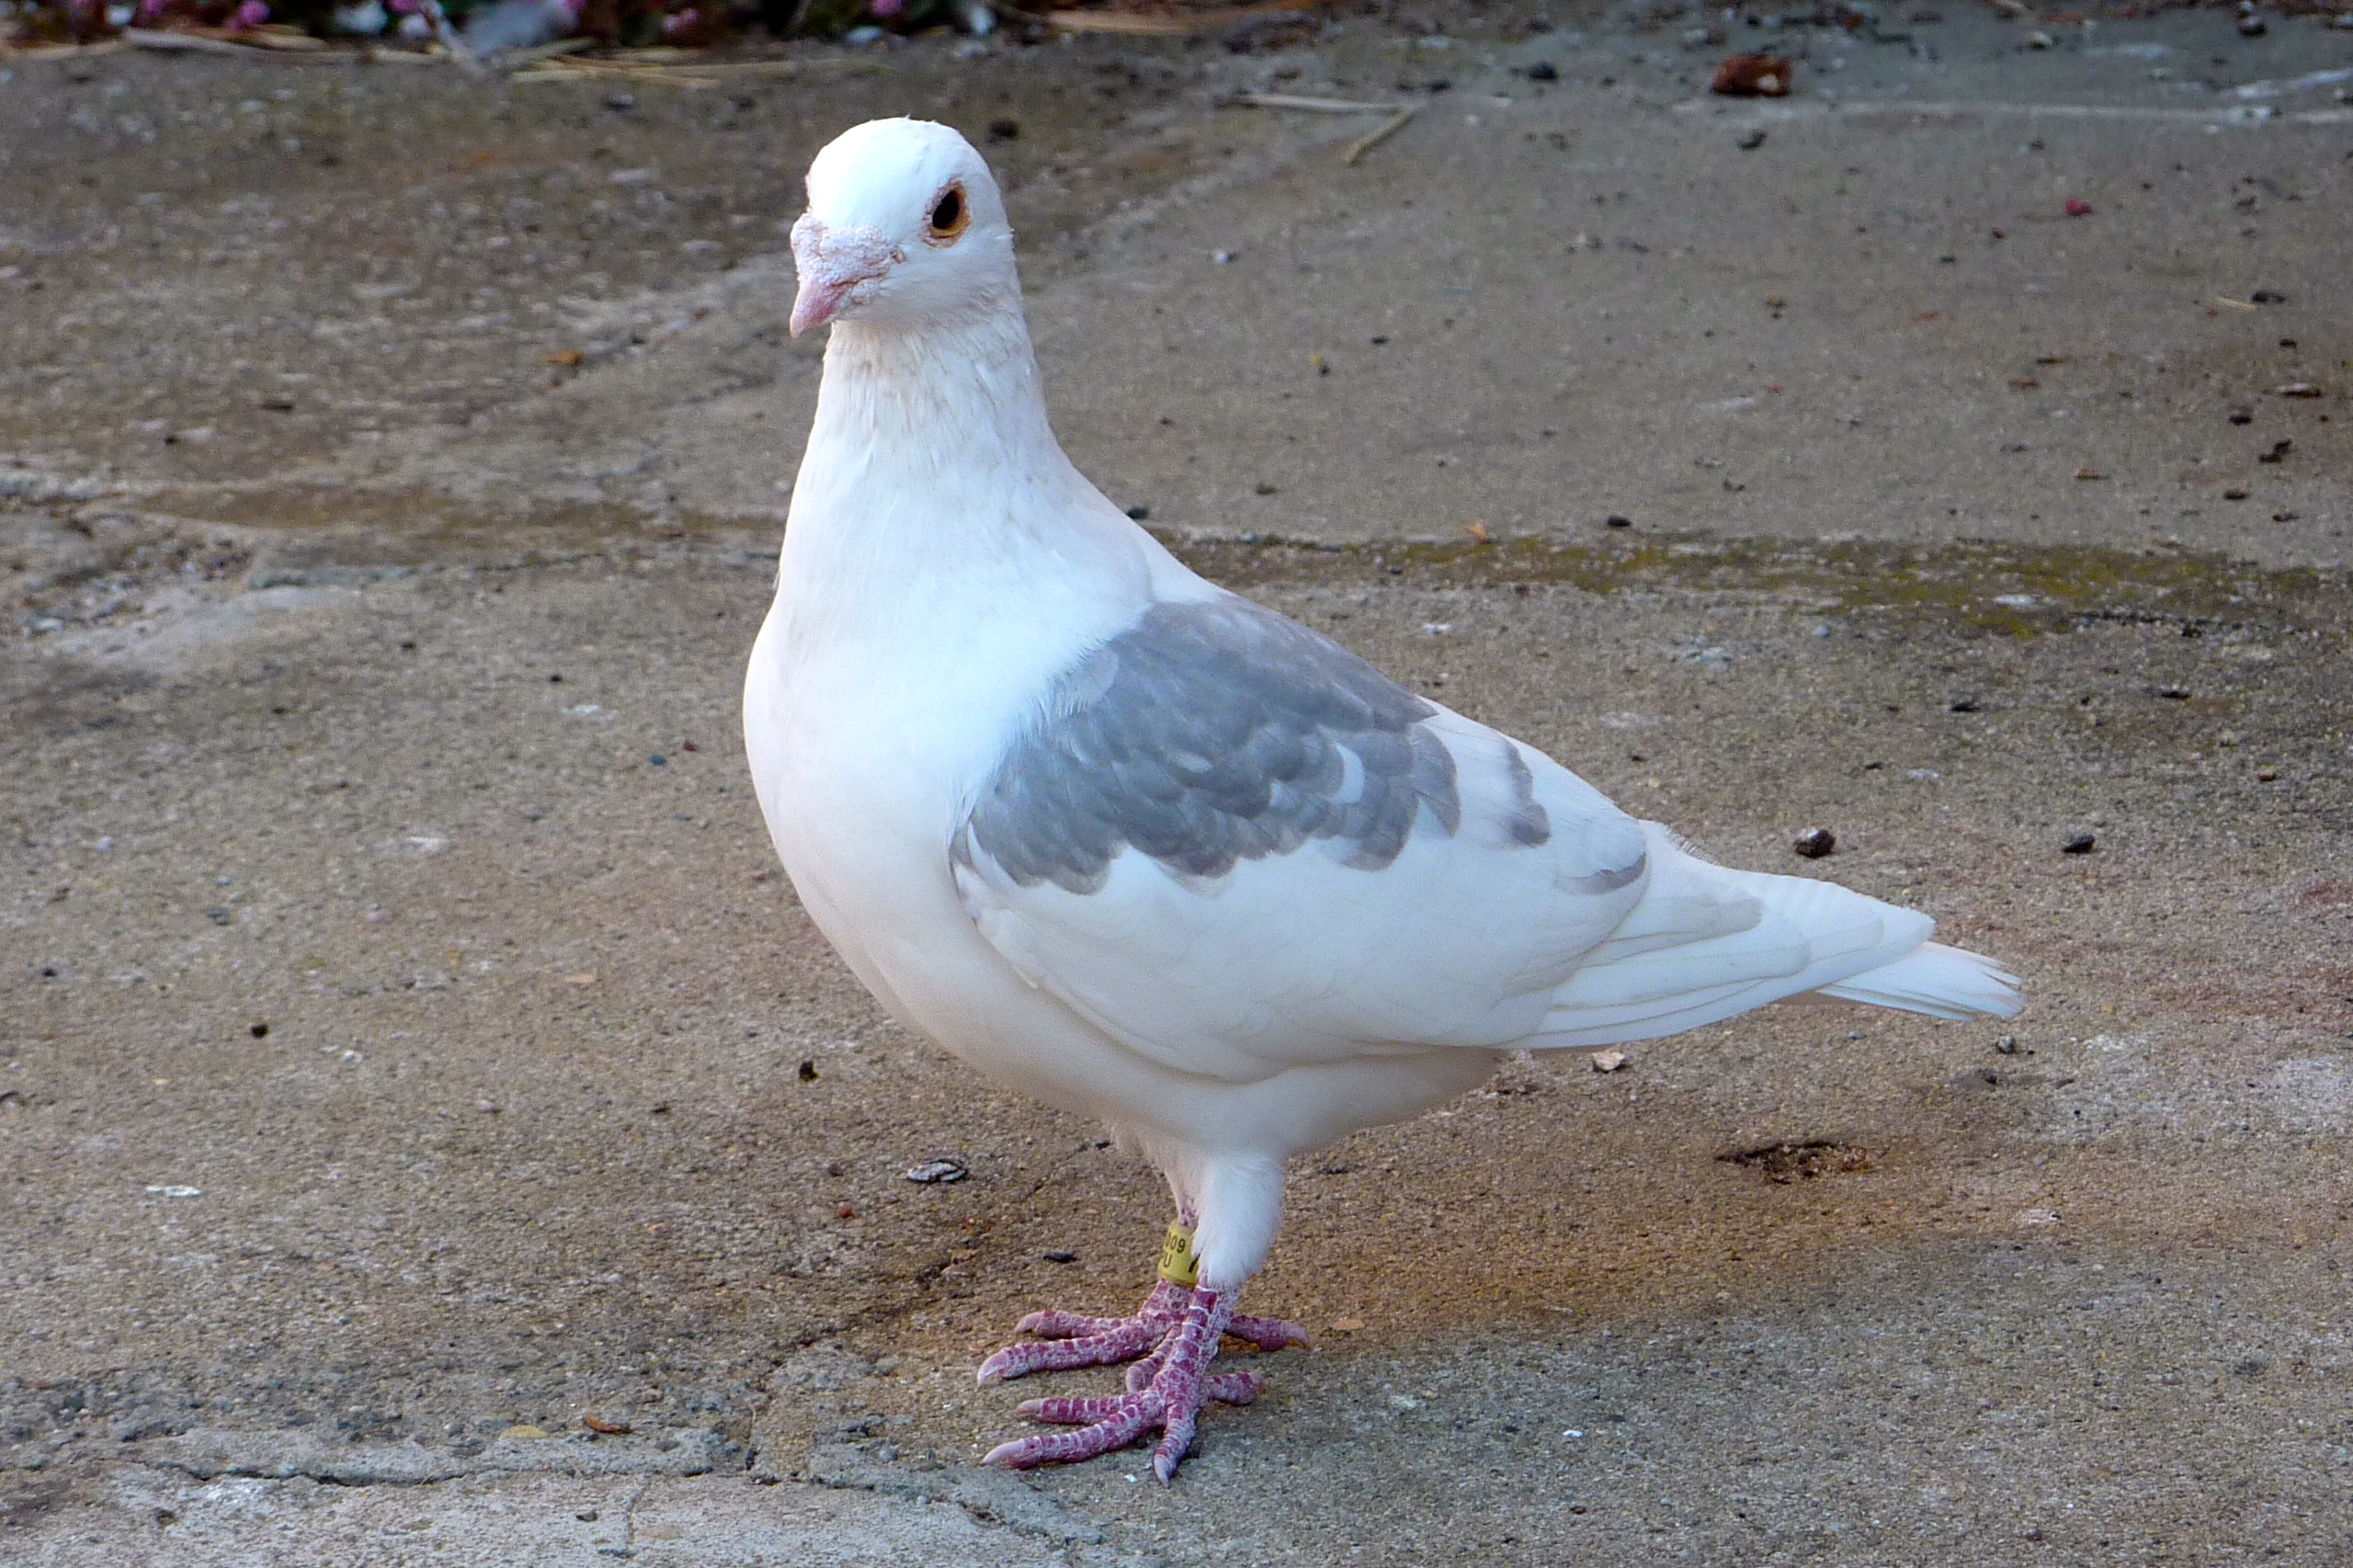 Racing Pigeon Hanging Around- What Should I Do? |